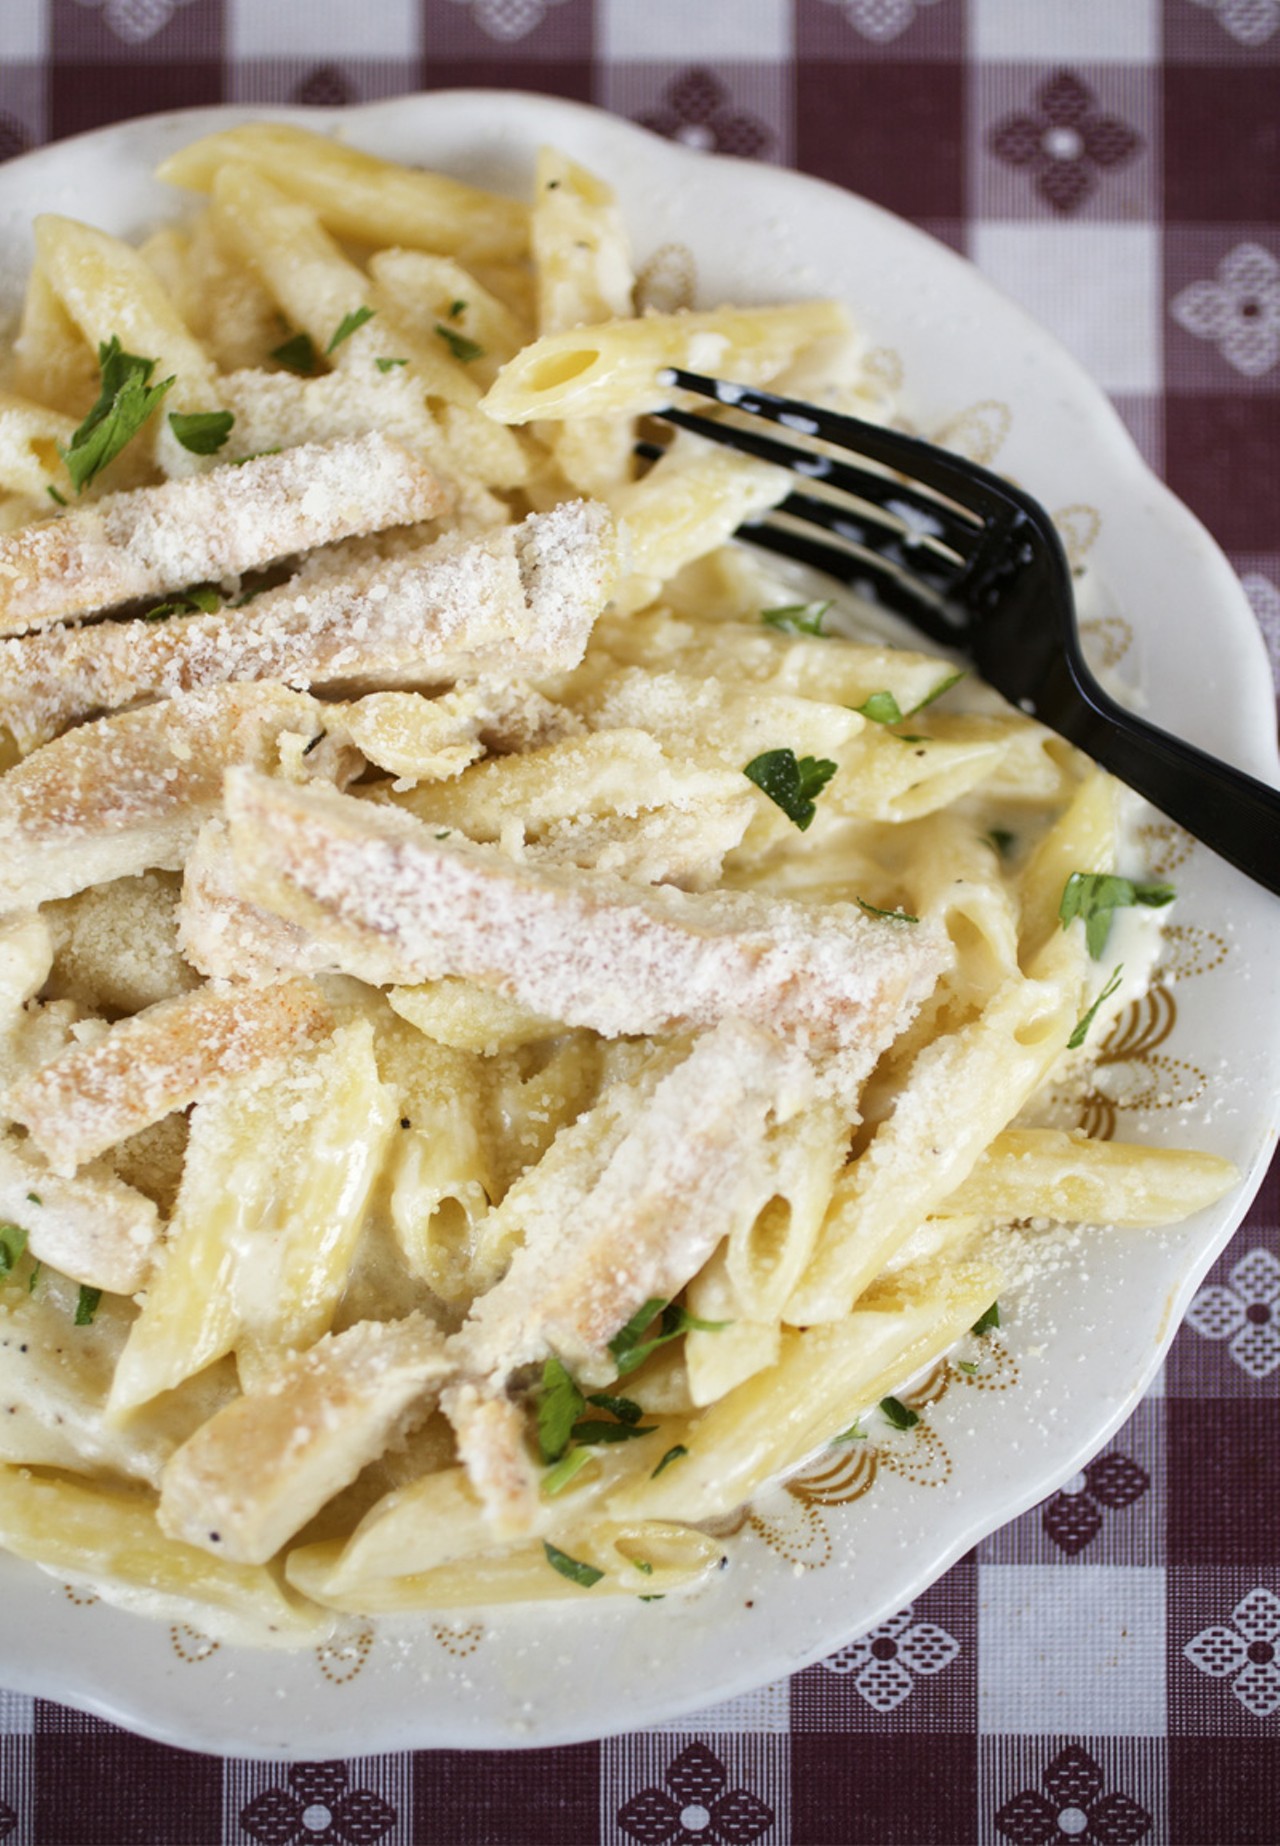 The Penne Alfredo is available plain or with Grilled chicken, as seen here.